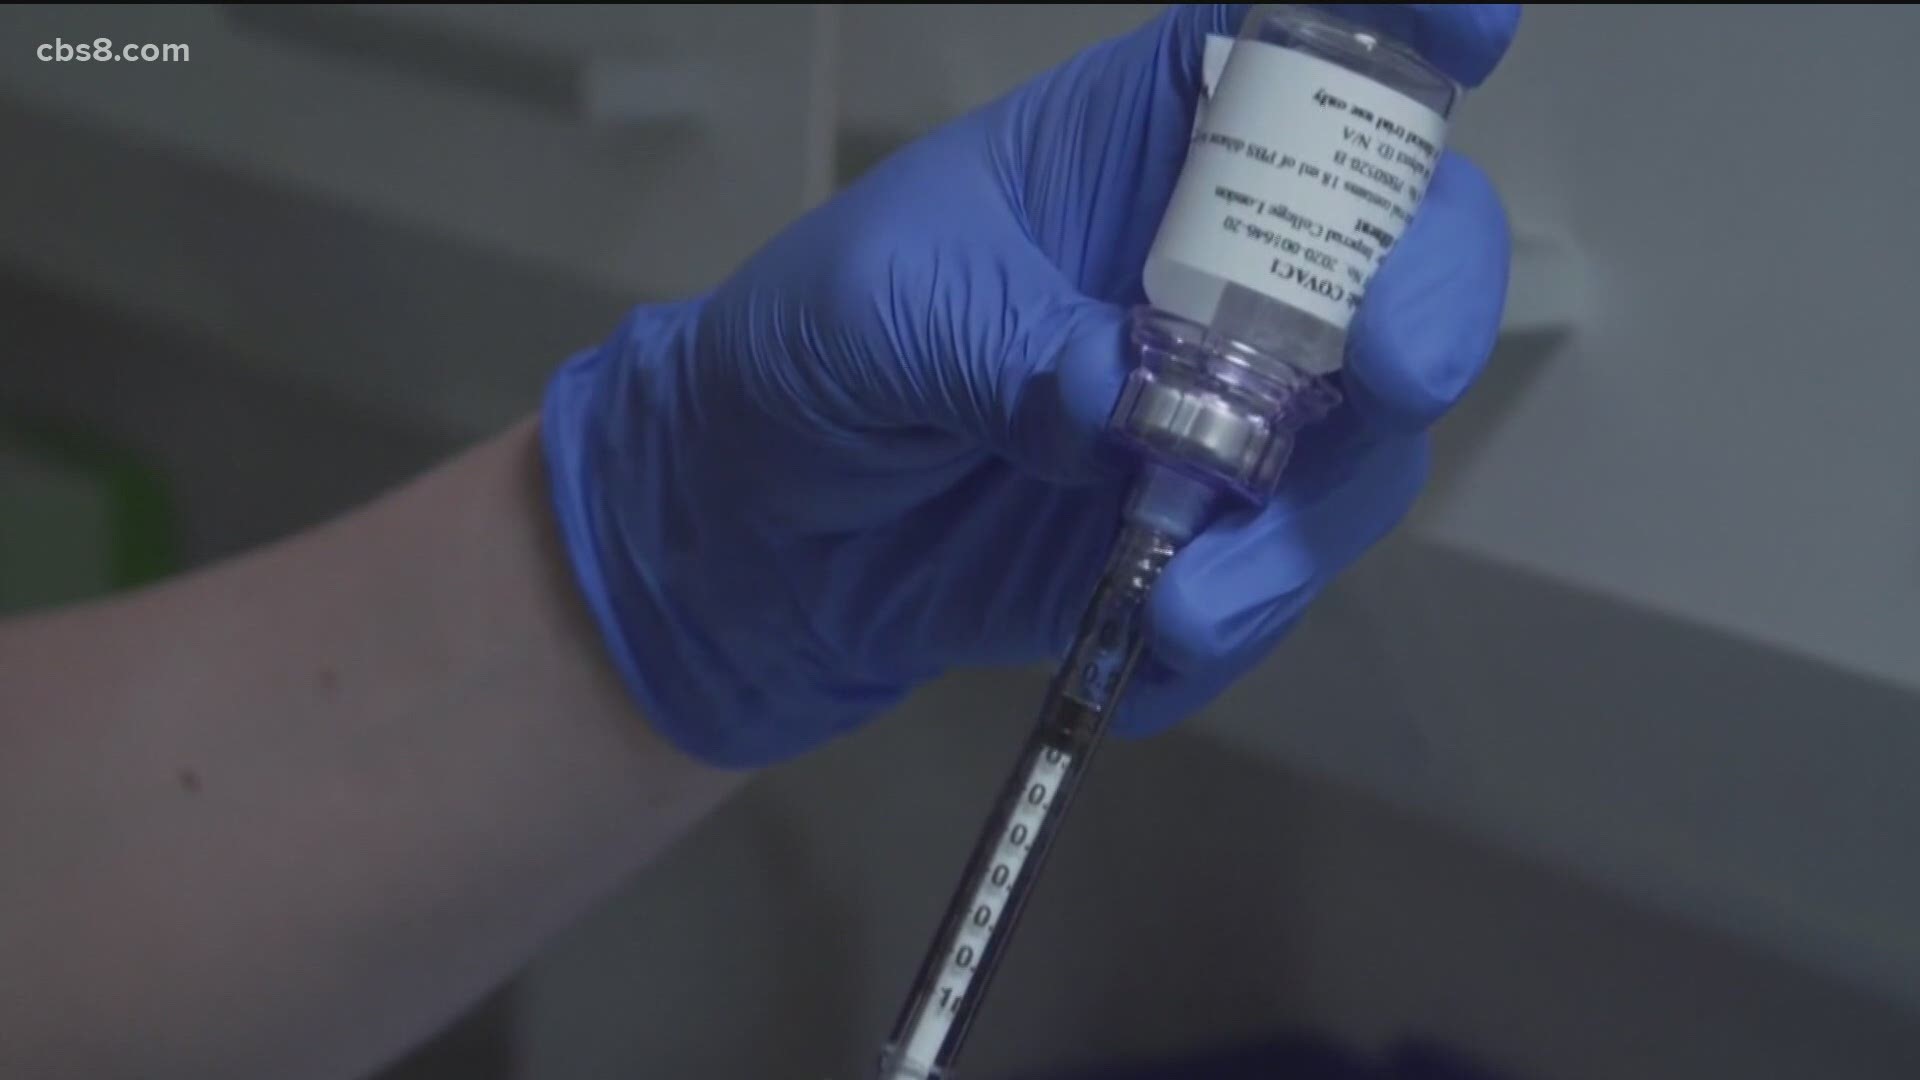 CDC officials now say they plan to update their guidance to say that anyone who suffers heart inflammation after one dose of the vaccine can defer a second shot.